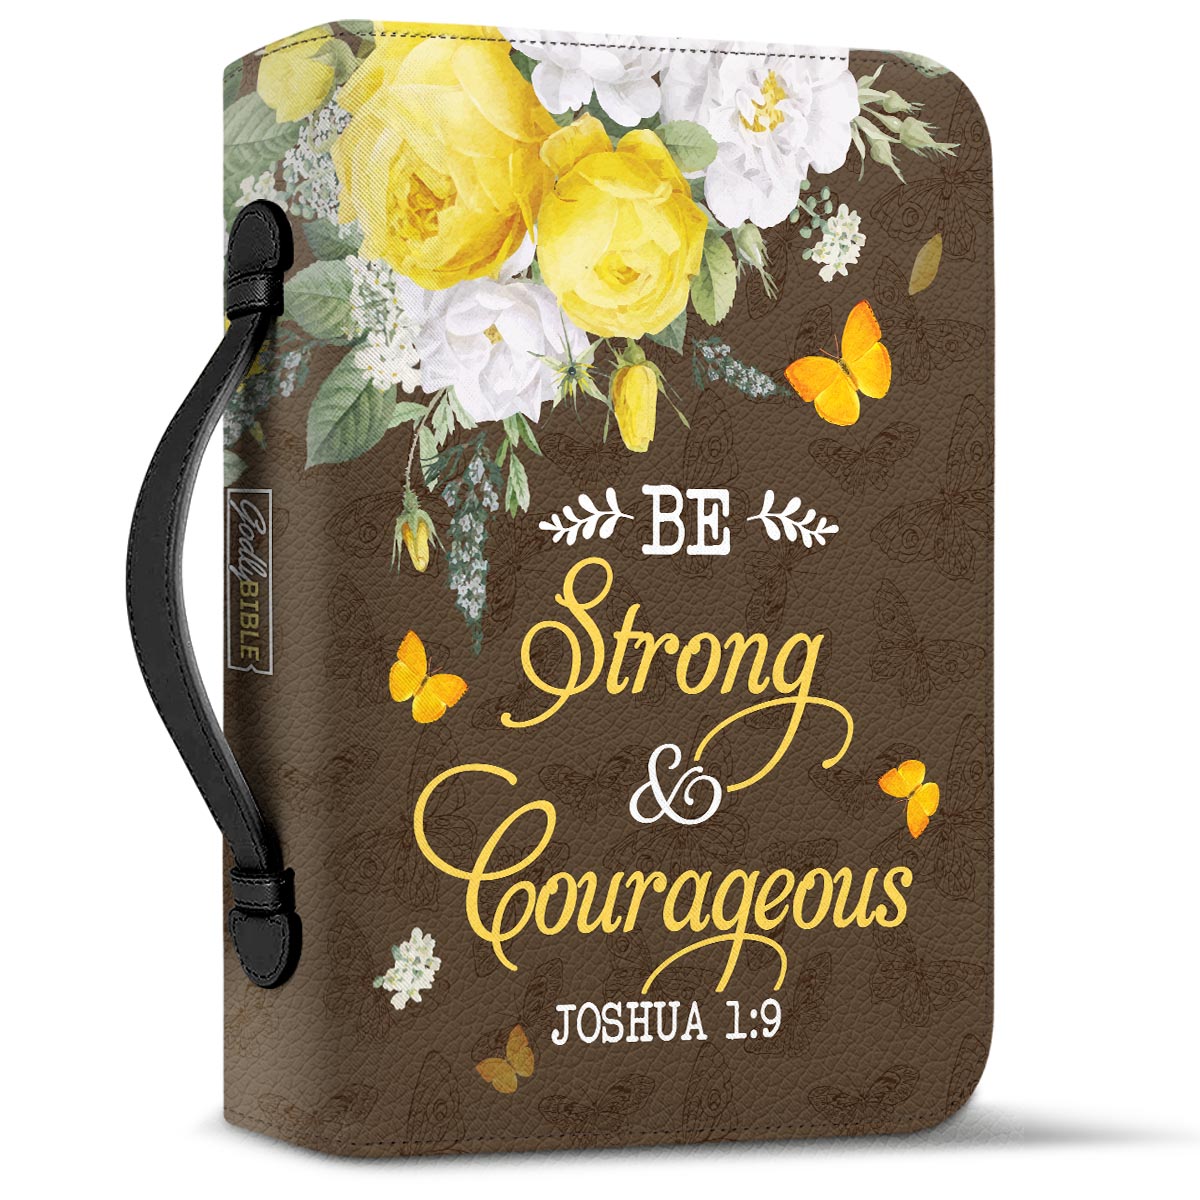  Personalized Bible Cover - Be Strong And Courageous Joshua 1 9 Butterfly Flower Bible Cover for Christians